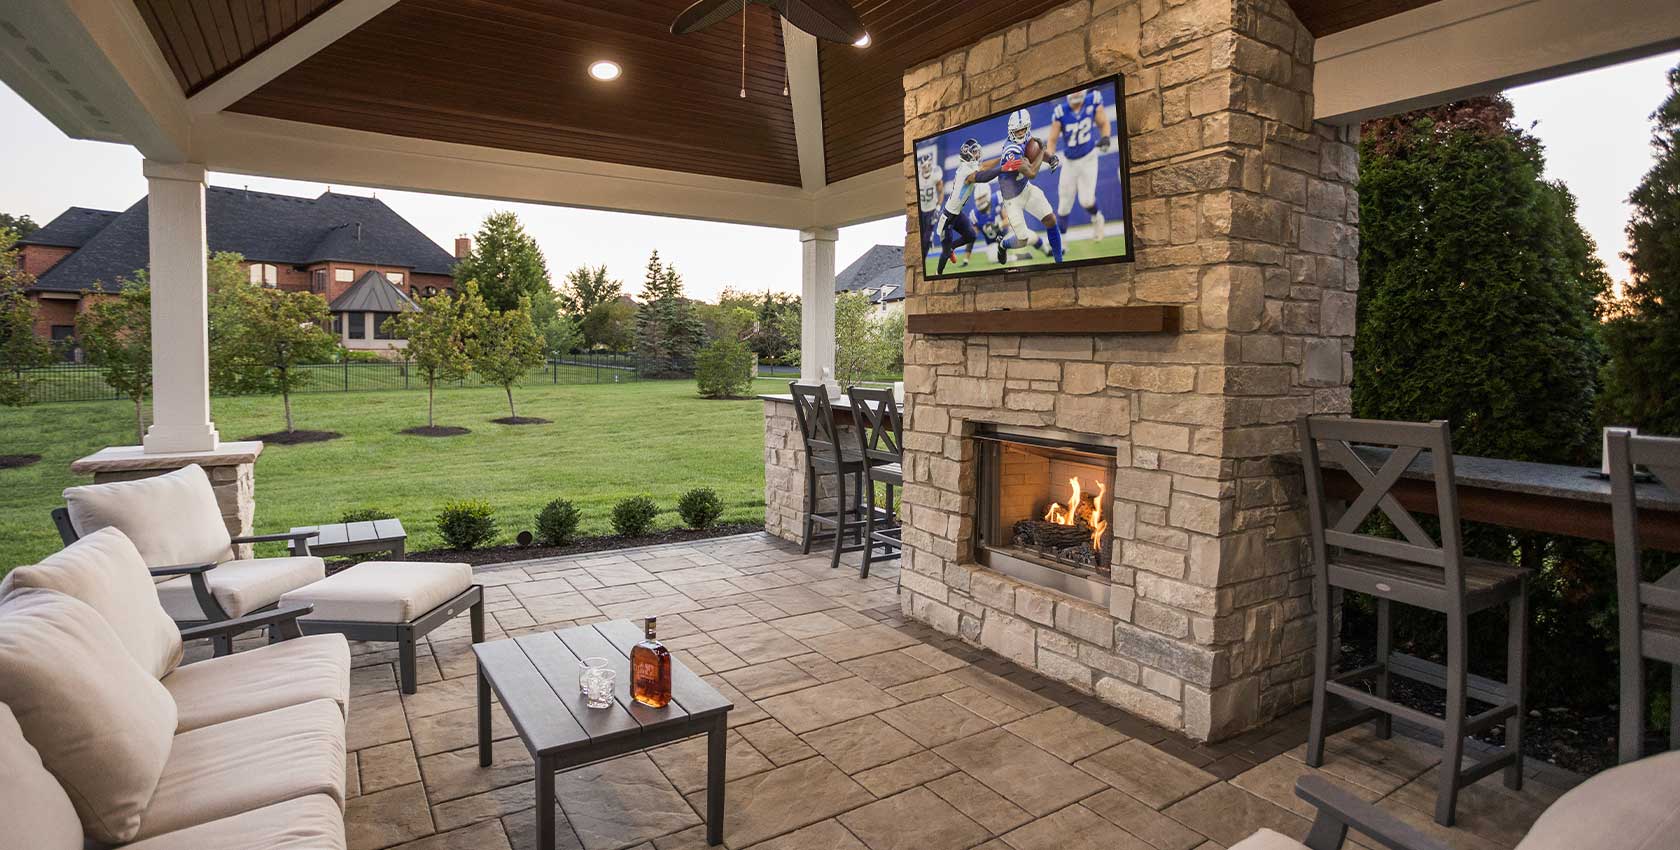 Outdoor living space with entertainment and coverage.